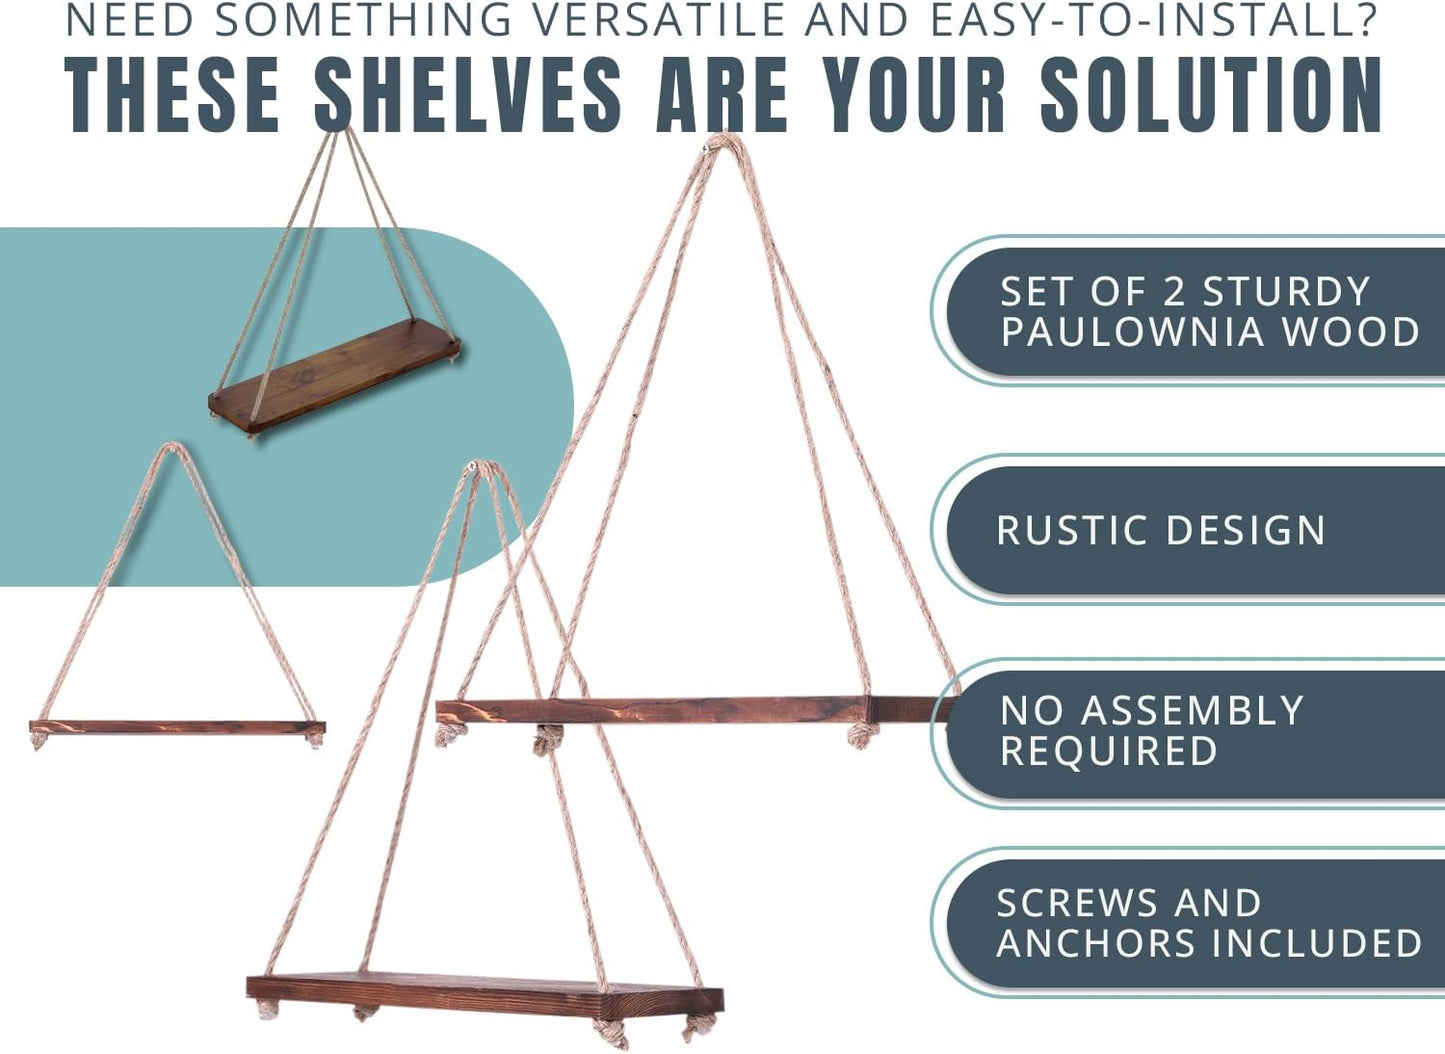 Hanging Shelves for Wall - Set of 2 